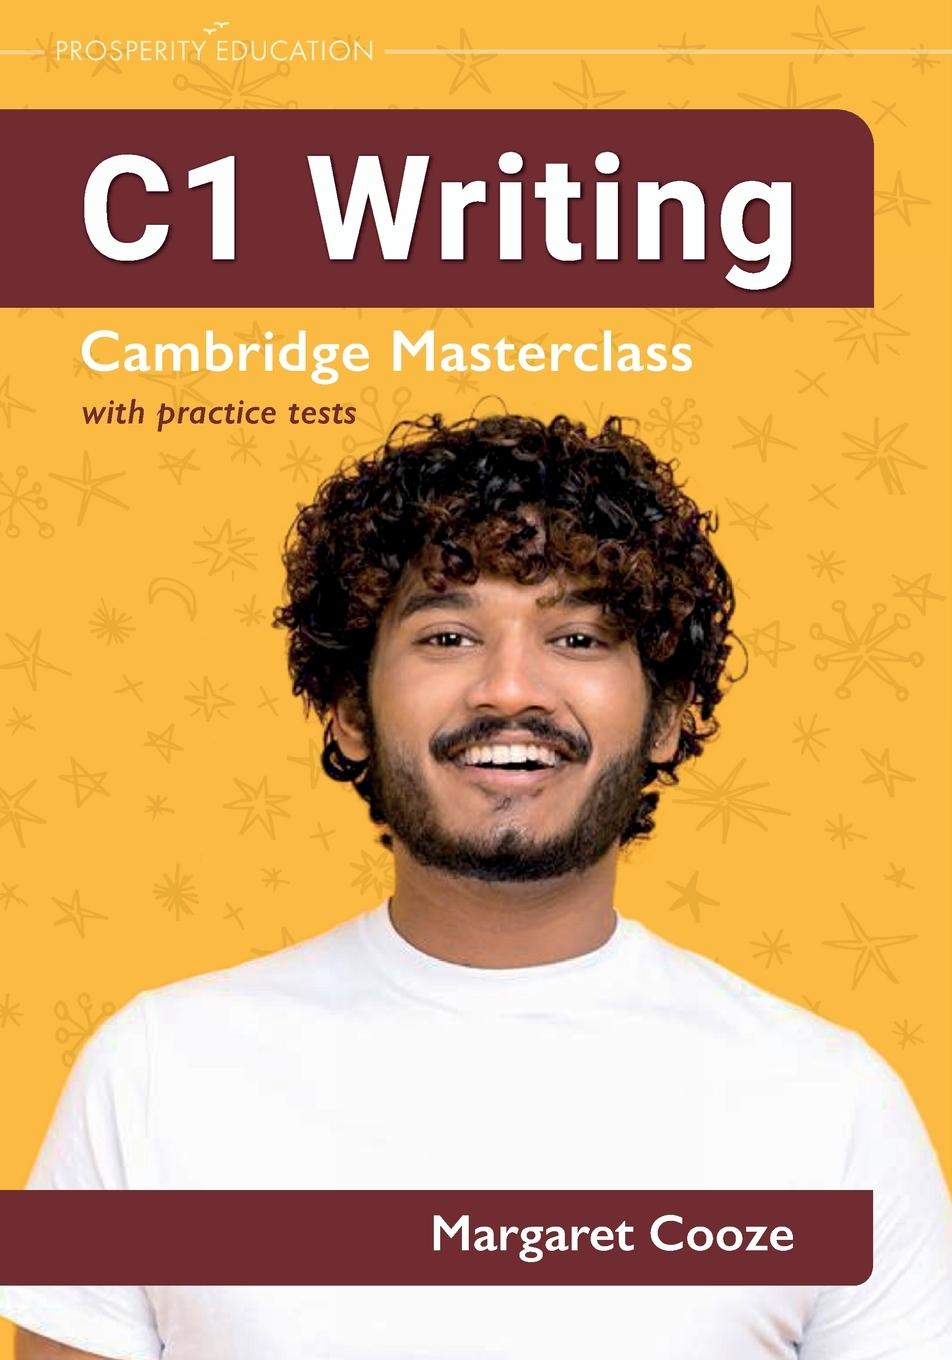 Book C1 Writing | Cambridge Masterclass with practice tests 